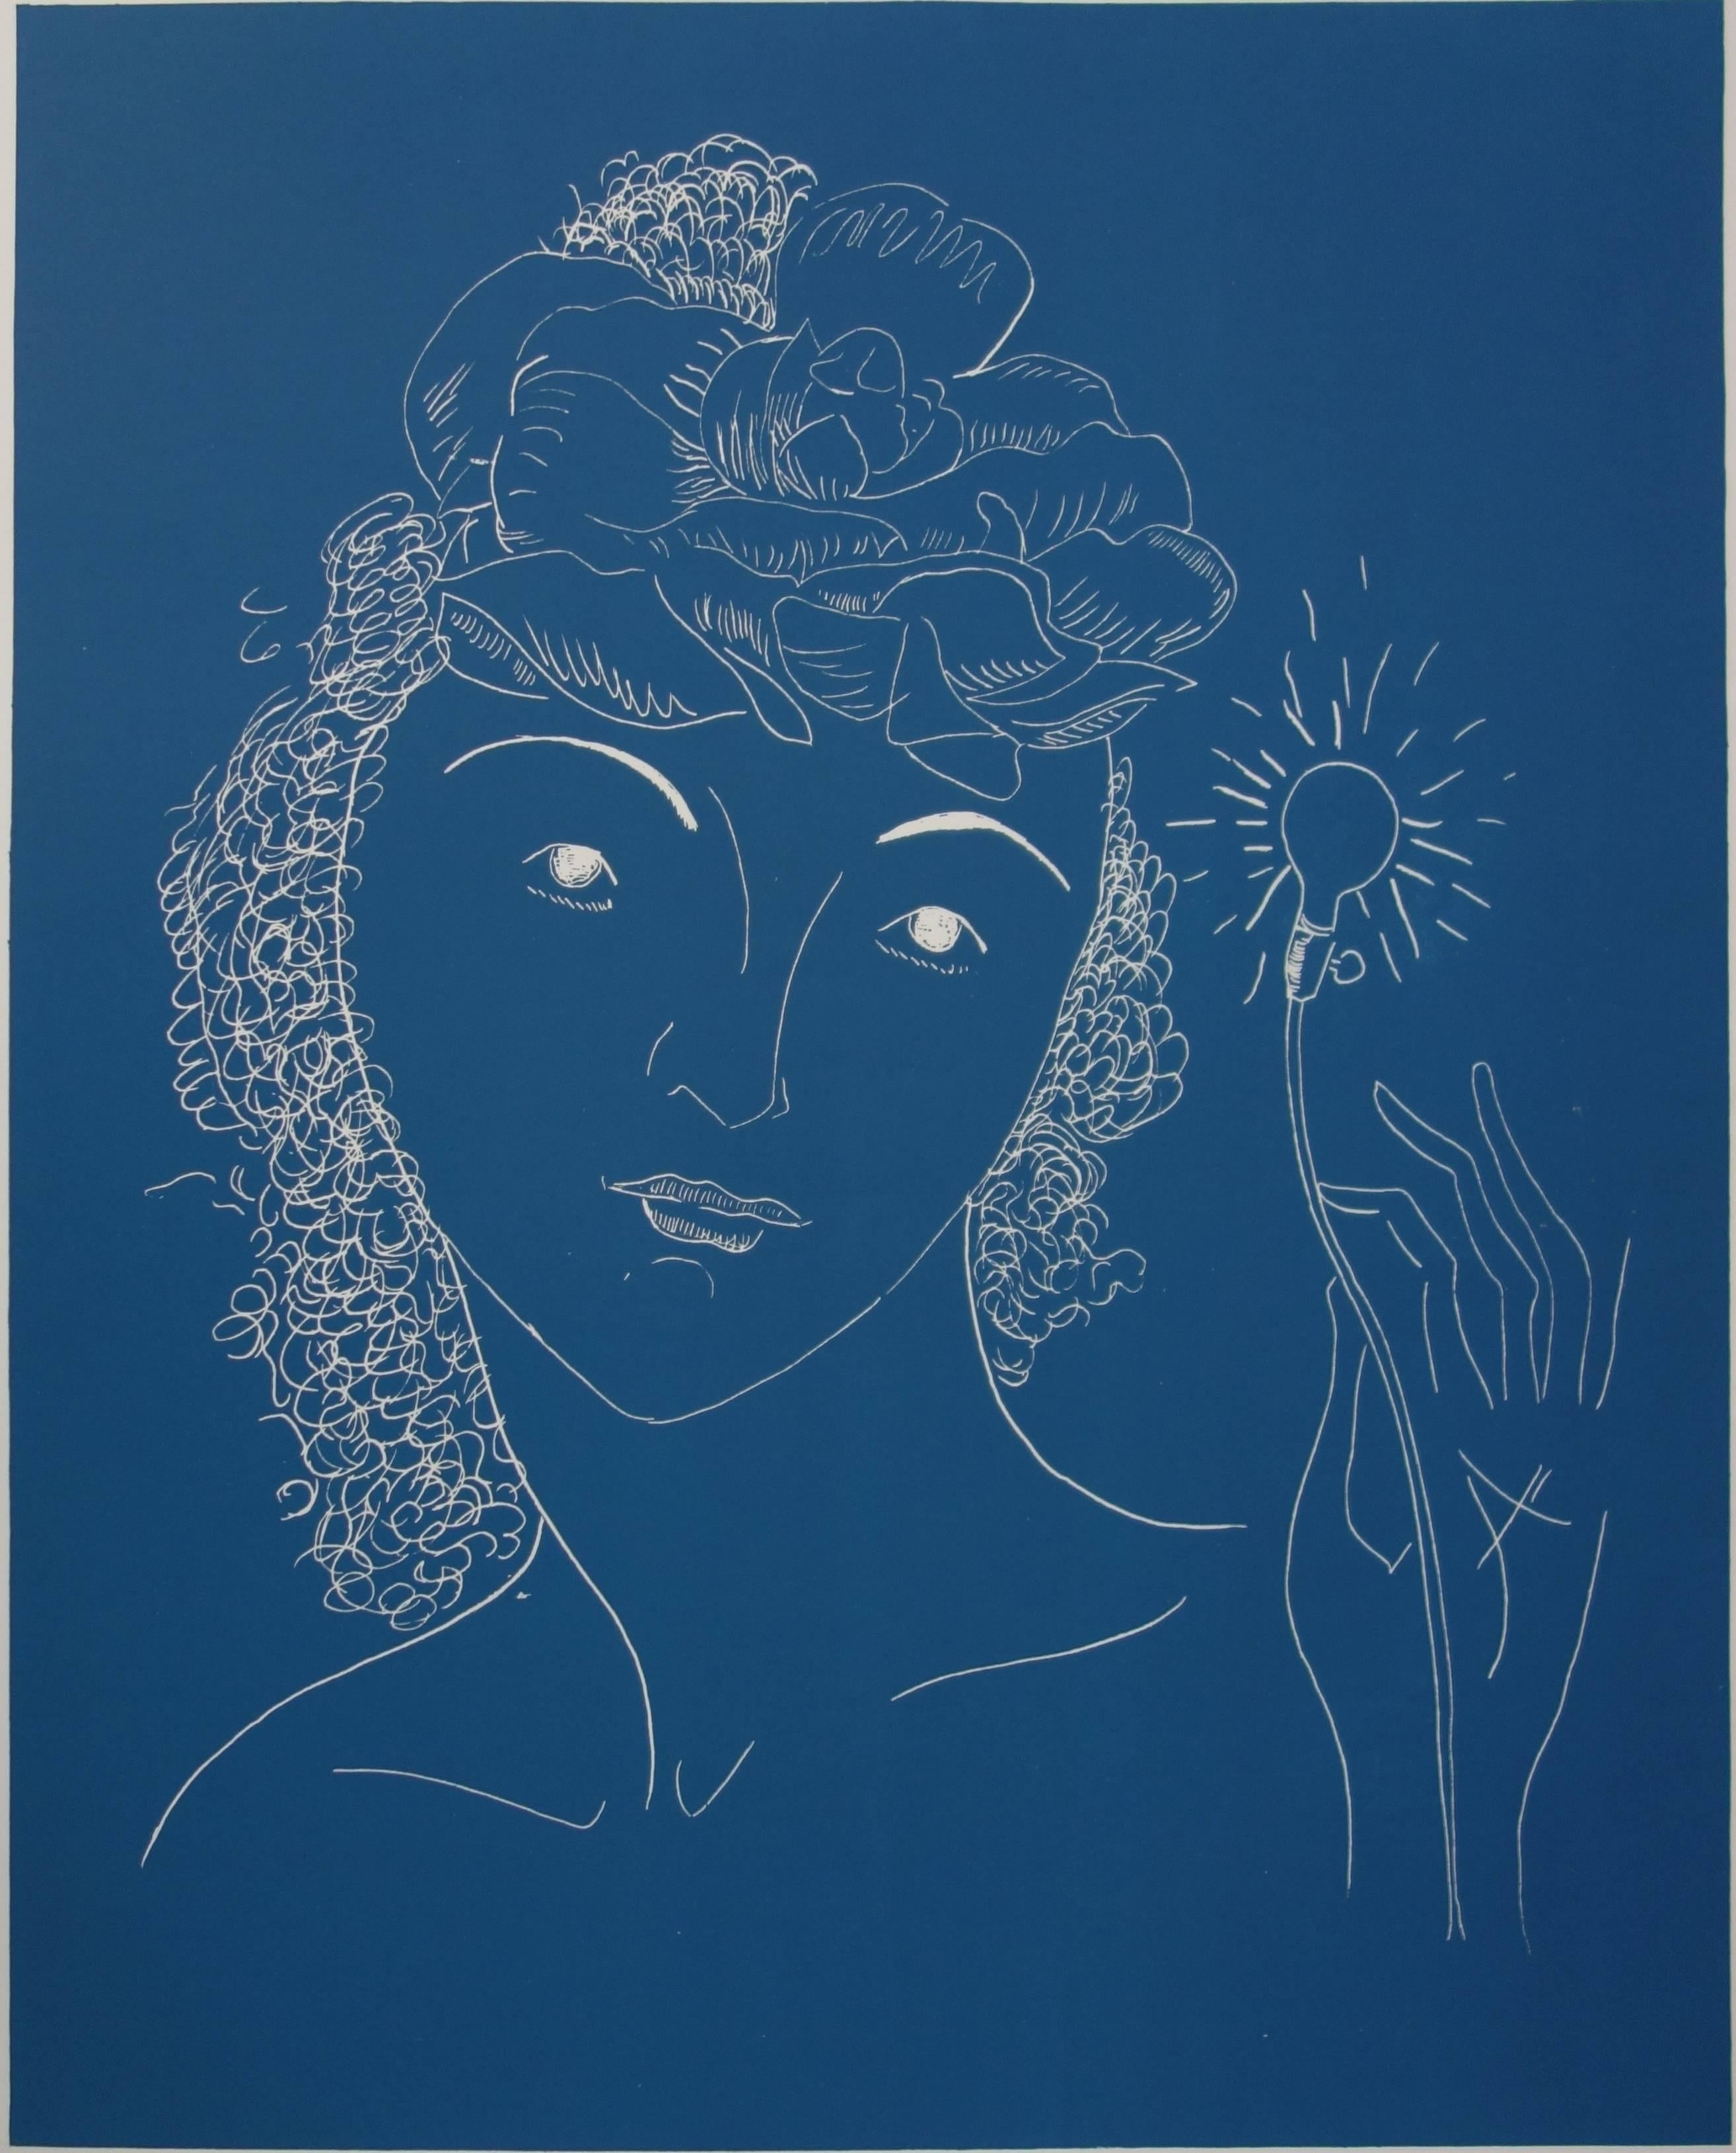 Woman with Light Flower - Lithograph - Mourlot 1970 - American Modern Print by Man Ray